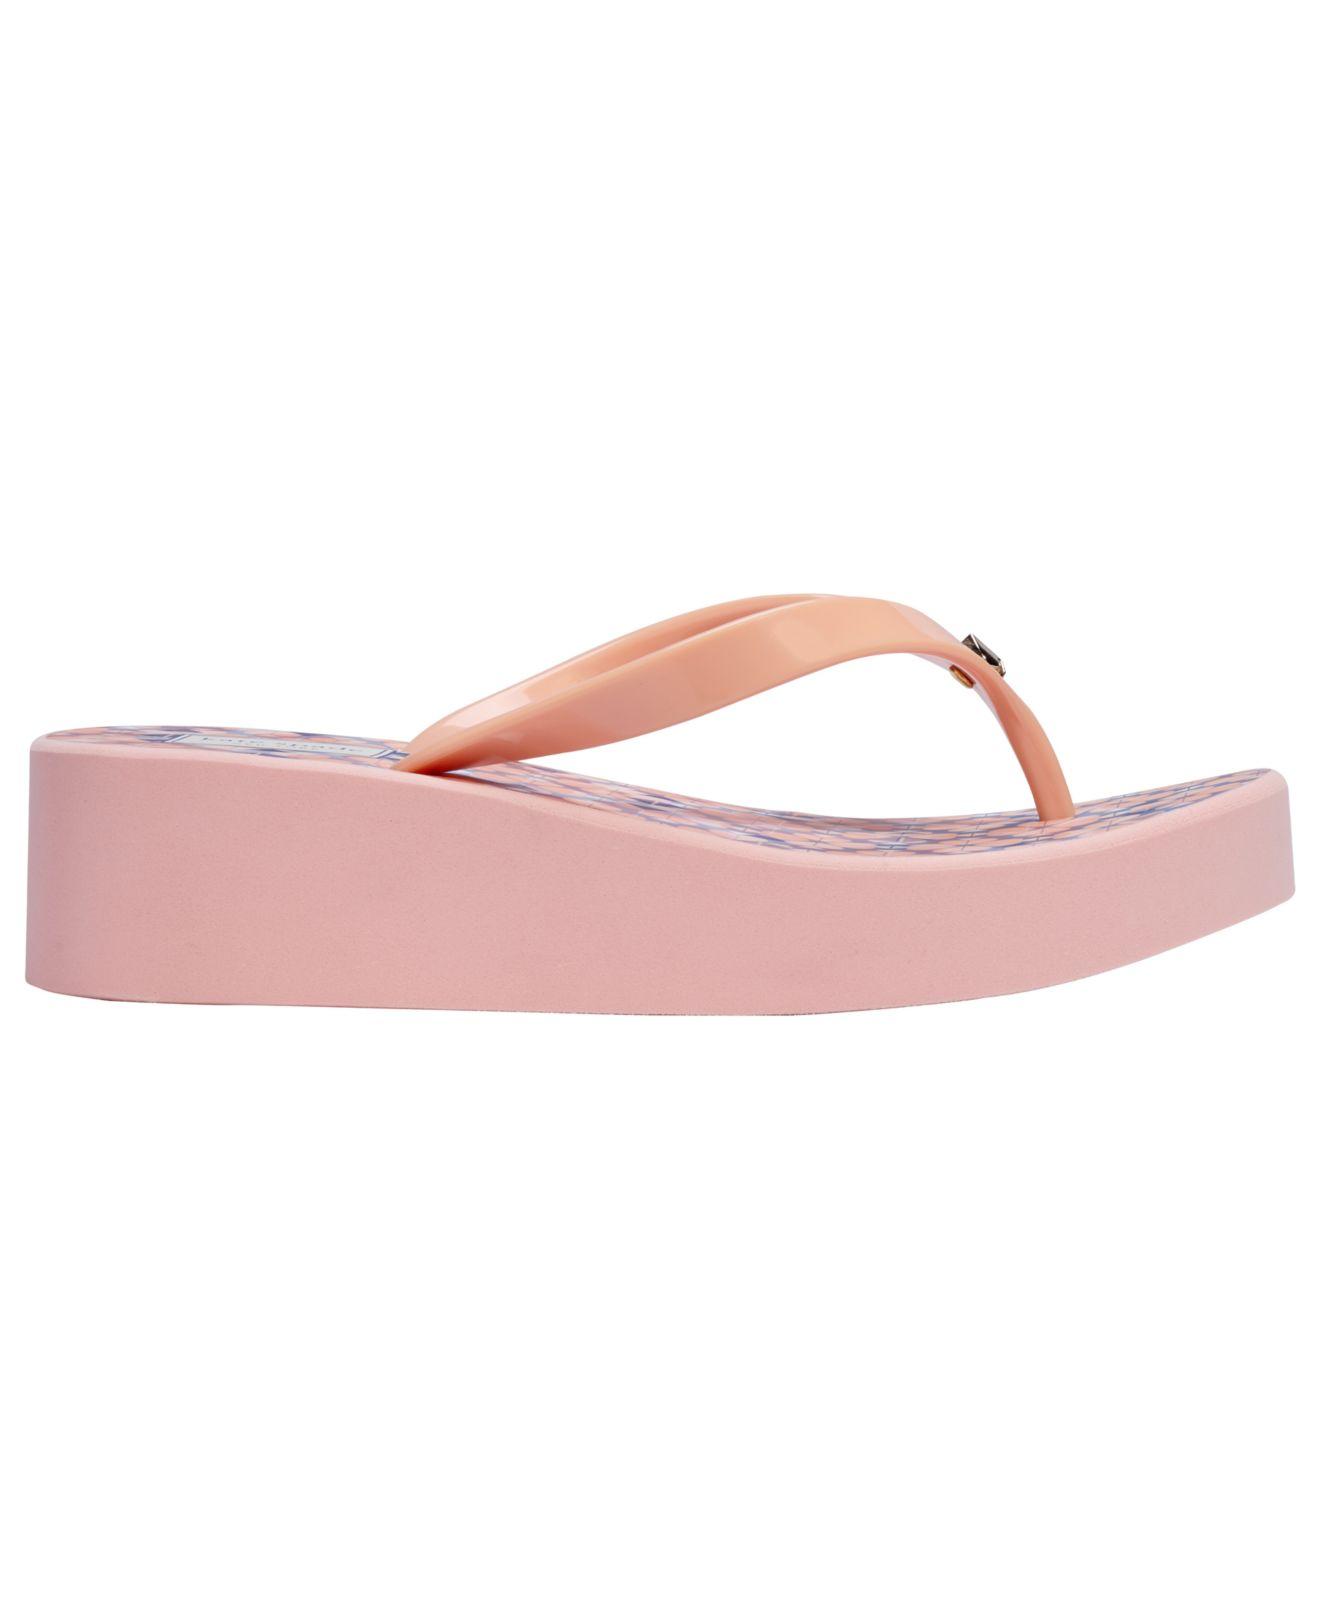 Kate Spade Rubber Rio Flip-flop Sandals in Pink - Lyst